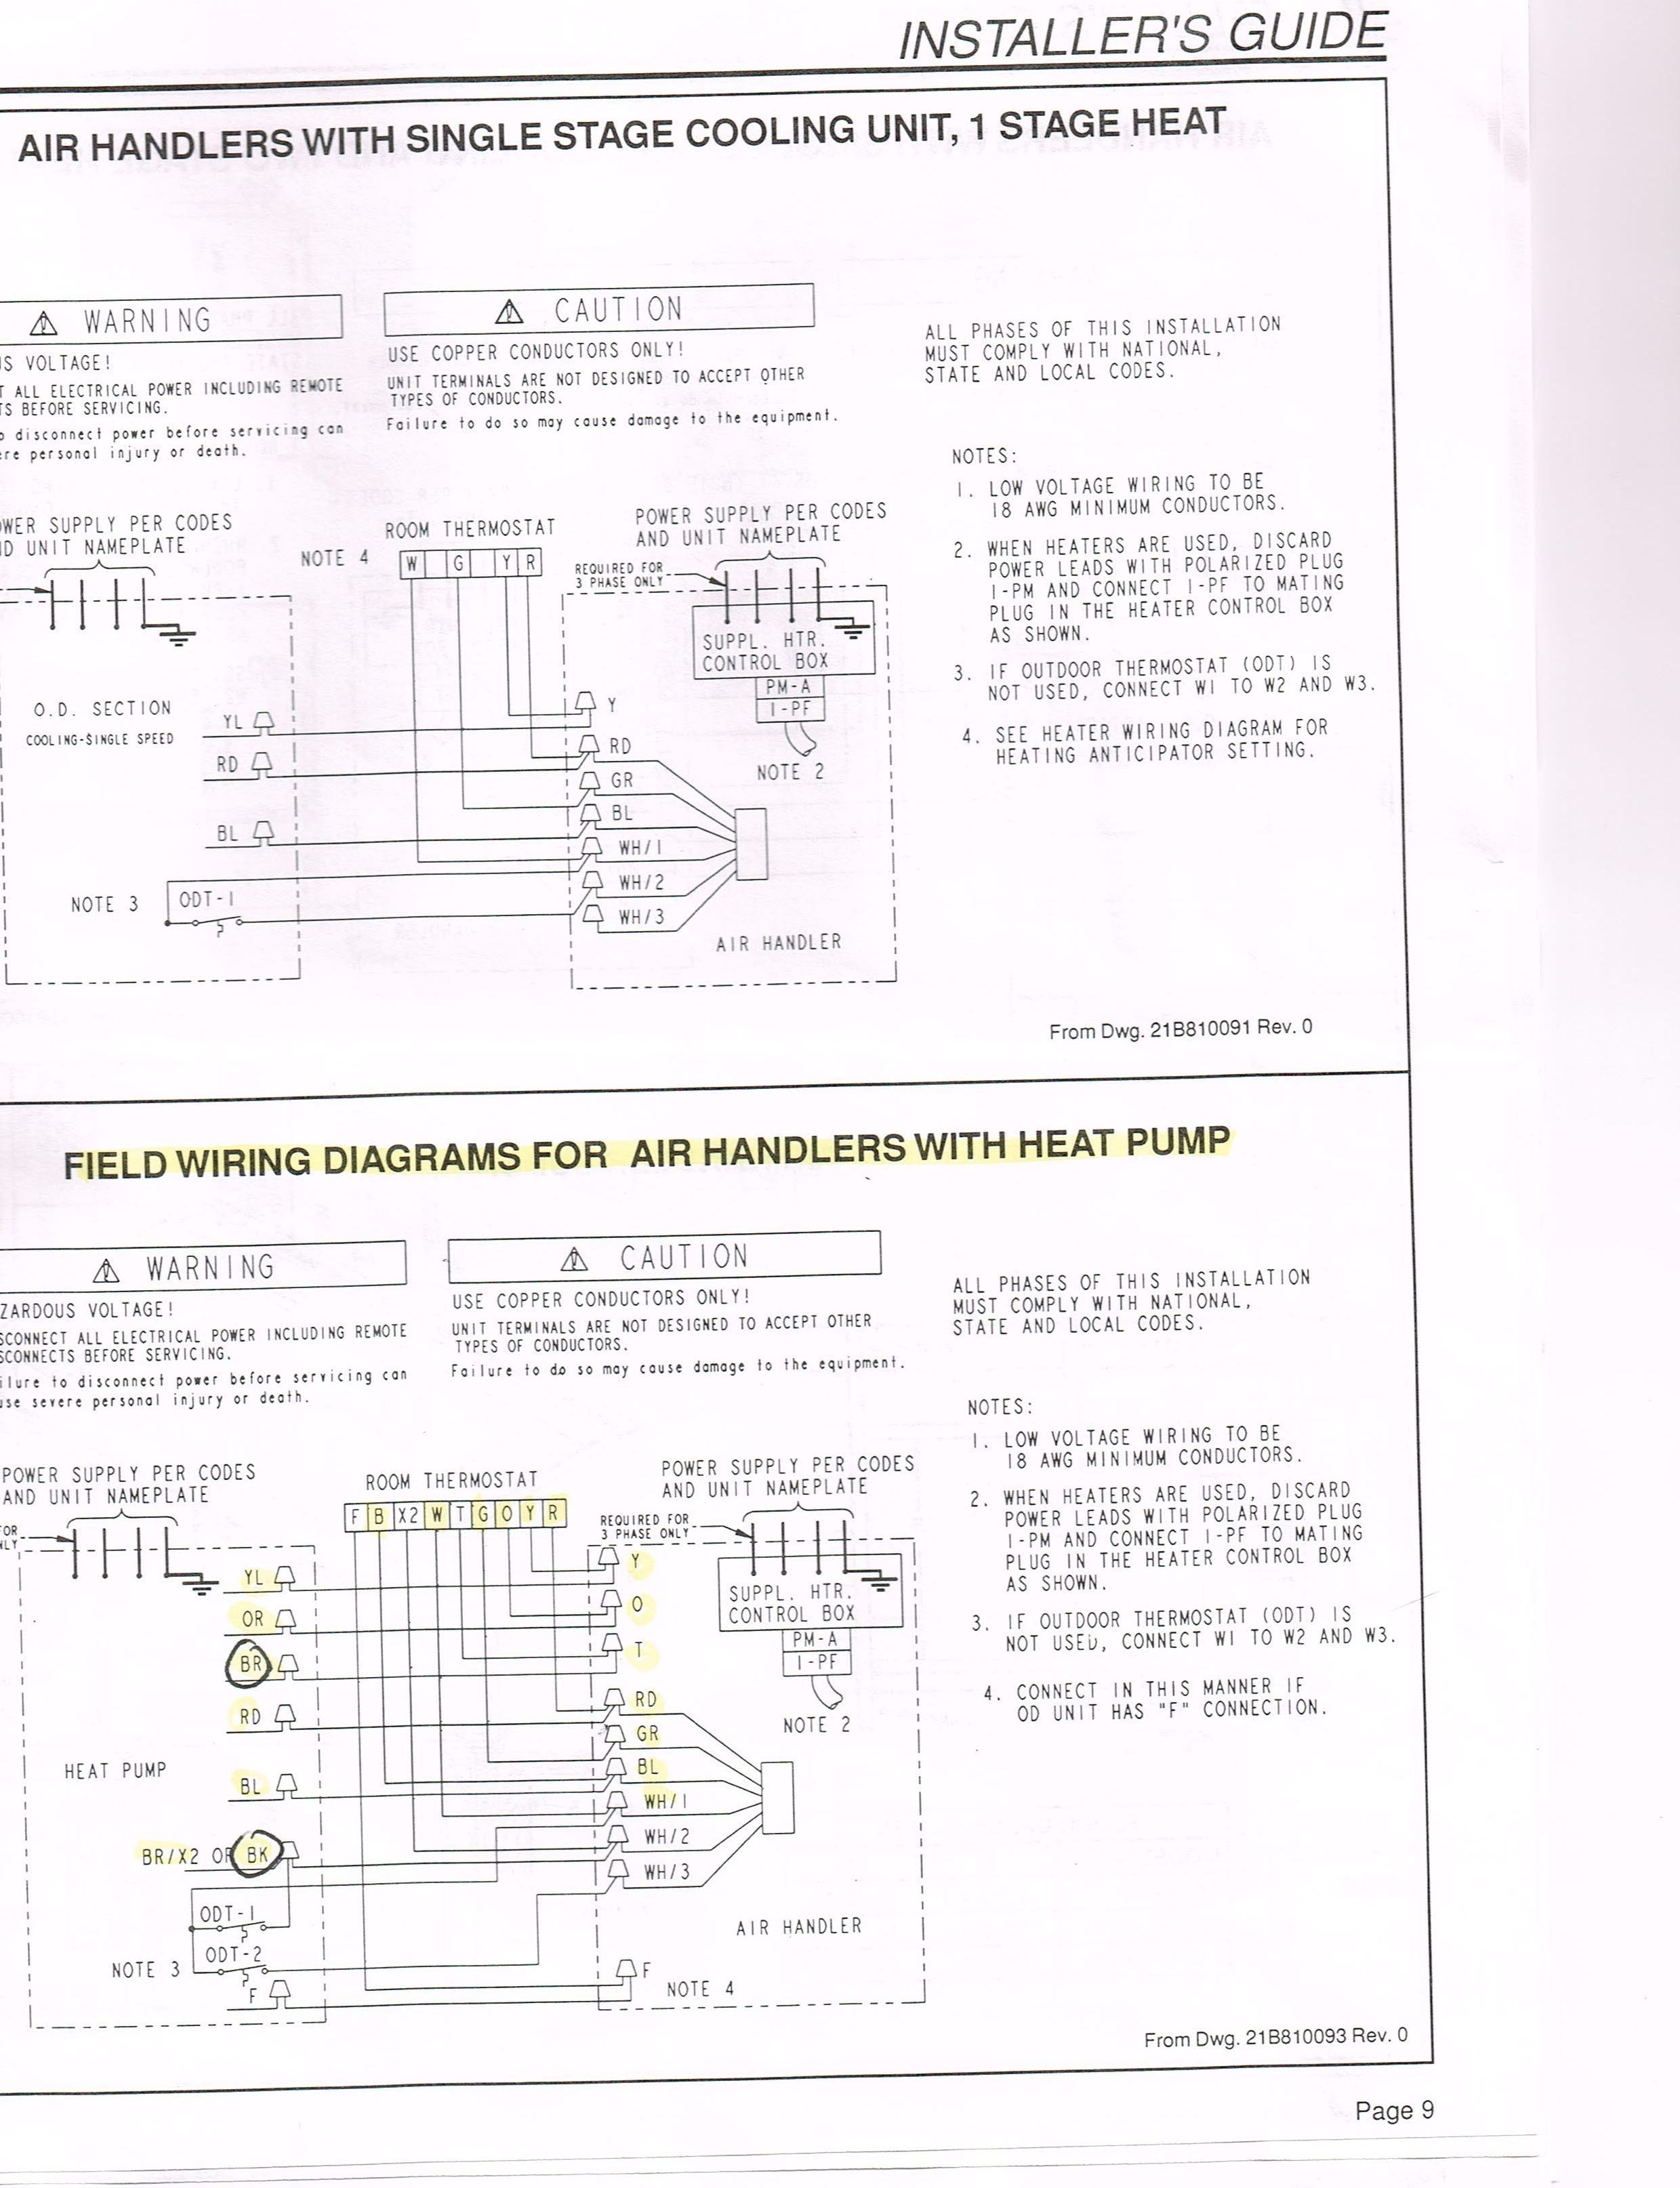 Wiring Diagram Switch Outlet Light Fresh Wiring Diagram for Outlet and Light & Wiring for